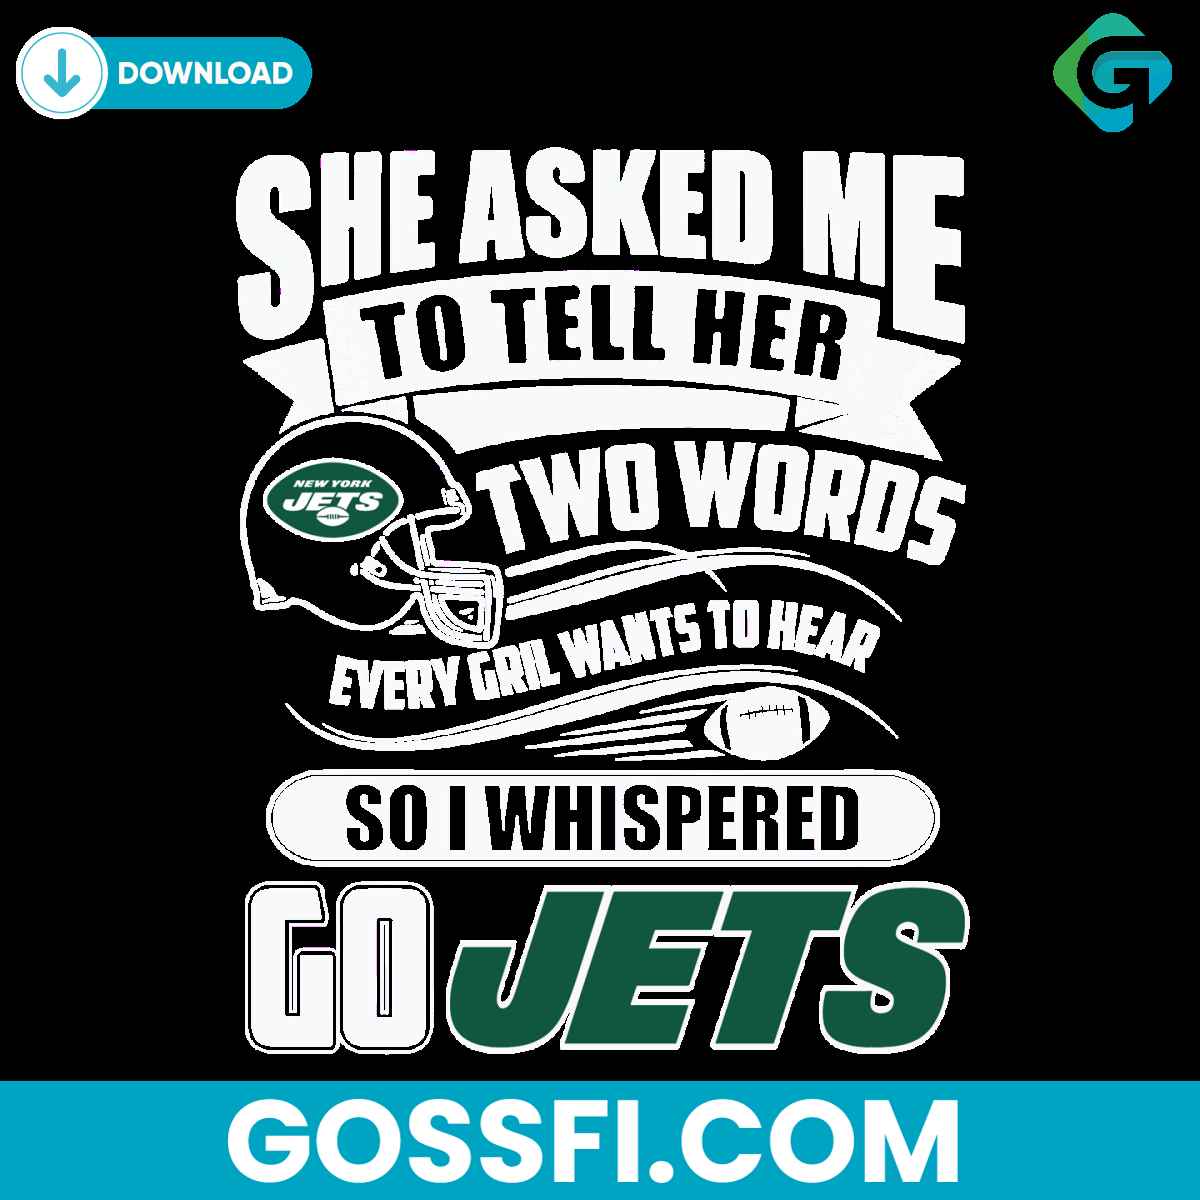 two-words-every-girl-wants-to-hear-go-jets-svg